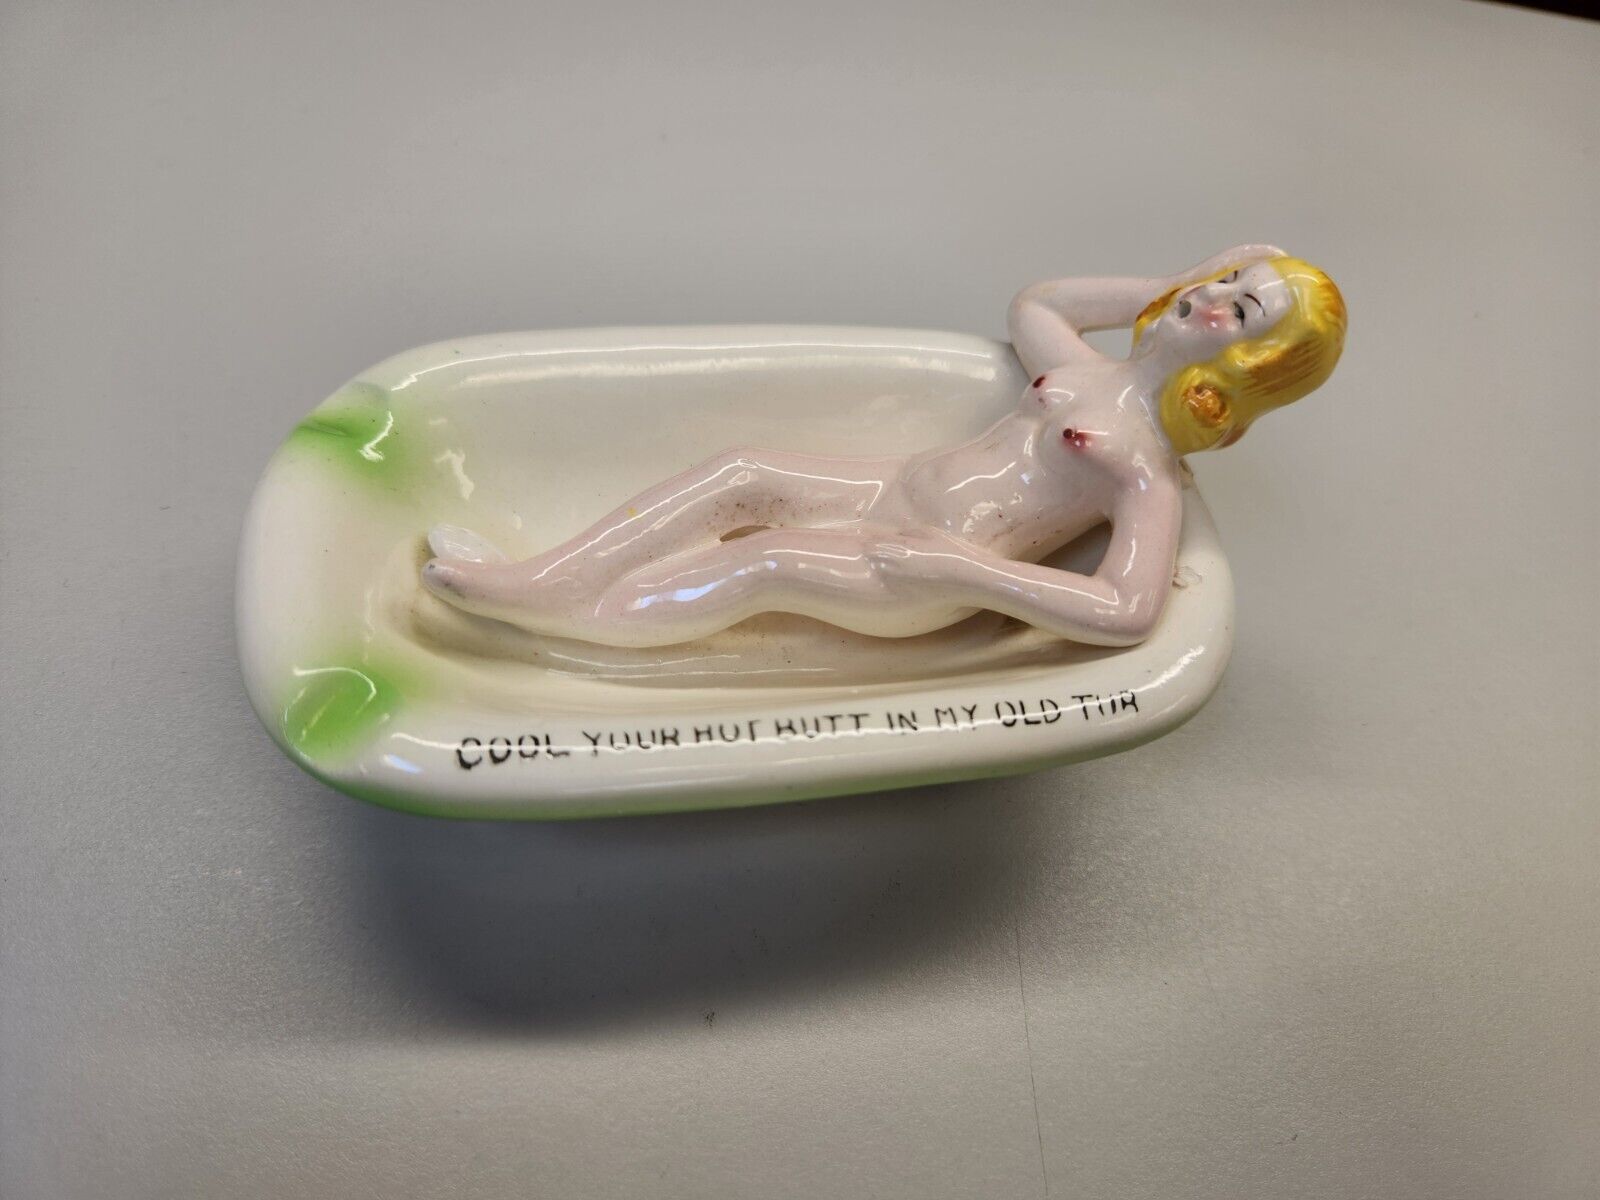 ASHTRAY VINTAGE RISQUÉ PORCELAIN NUDE WOMAN COOL YOUR HOT BUTT IN MY OLD TUB